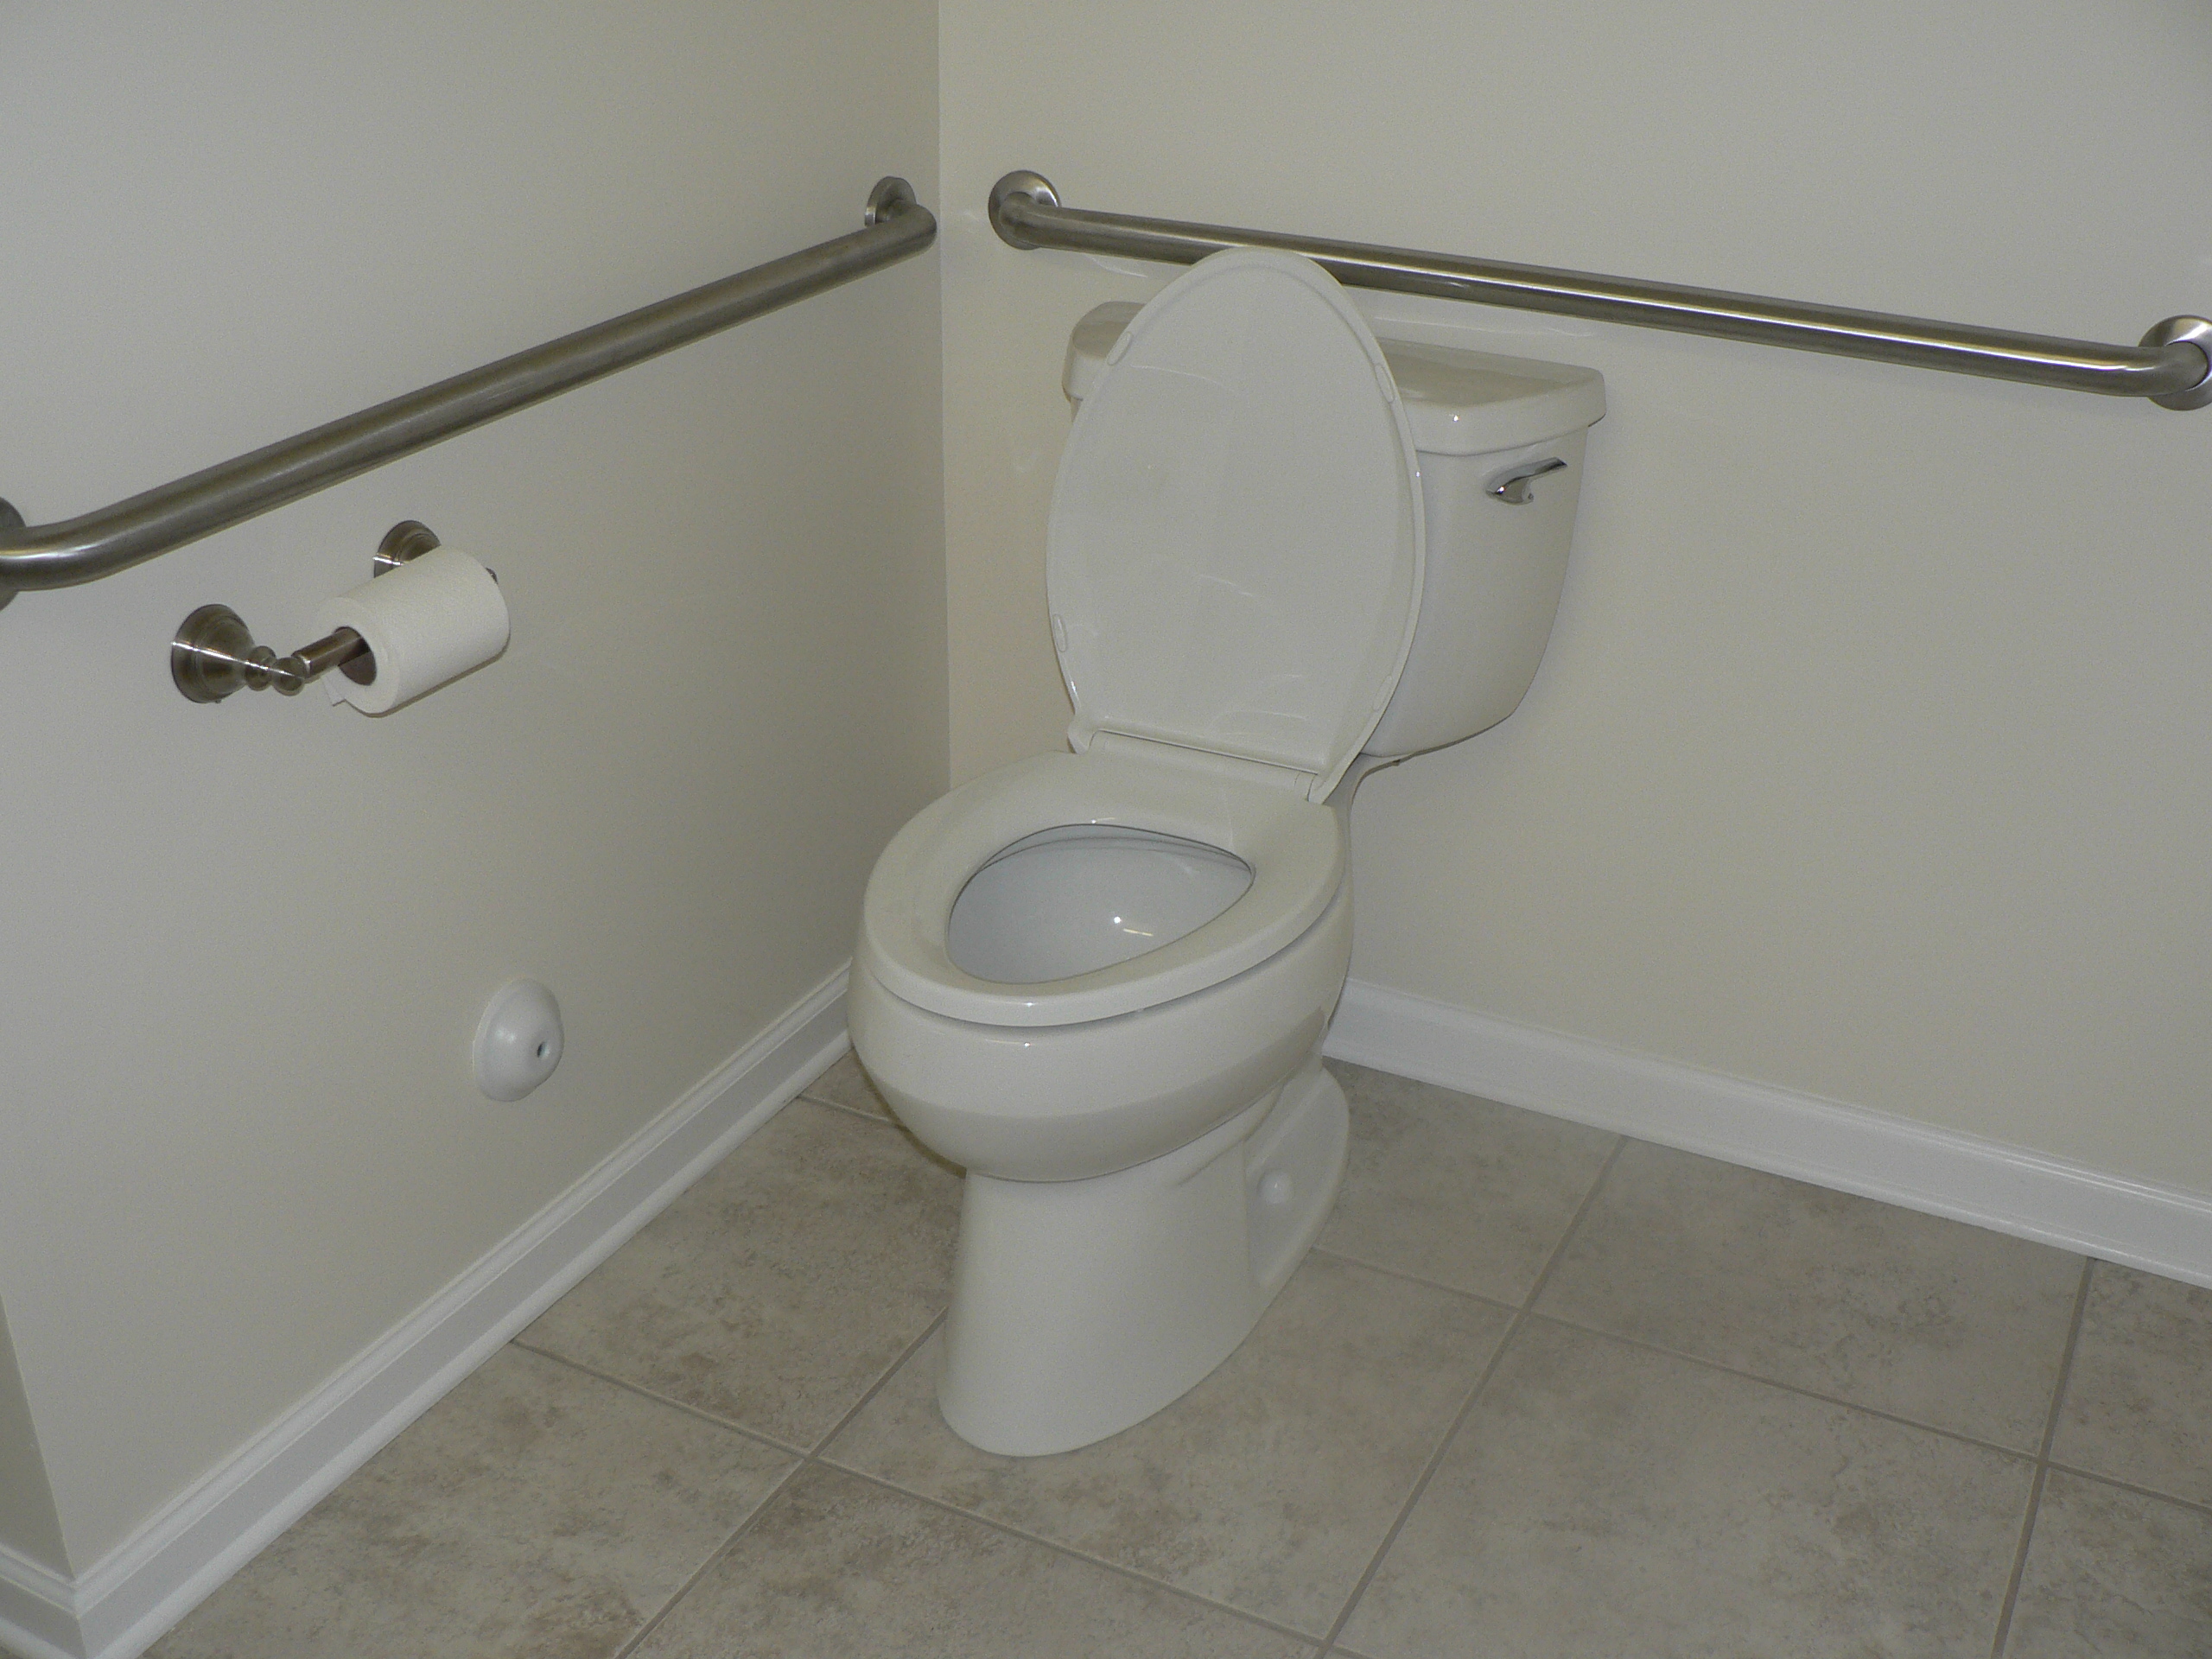 The handicap accessible commode area